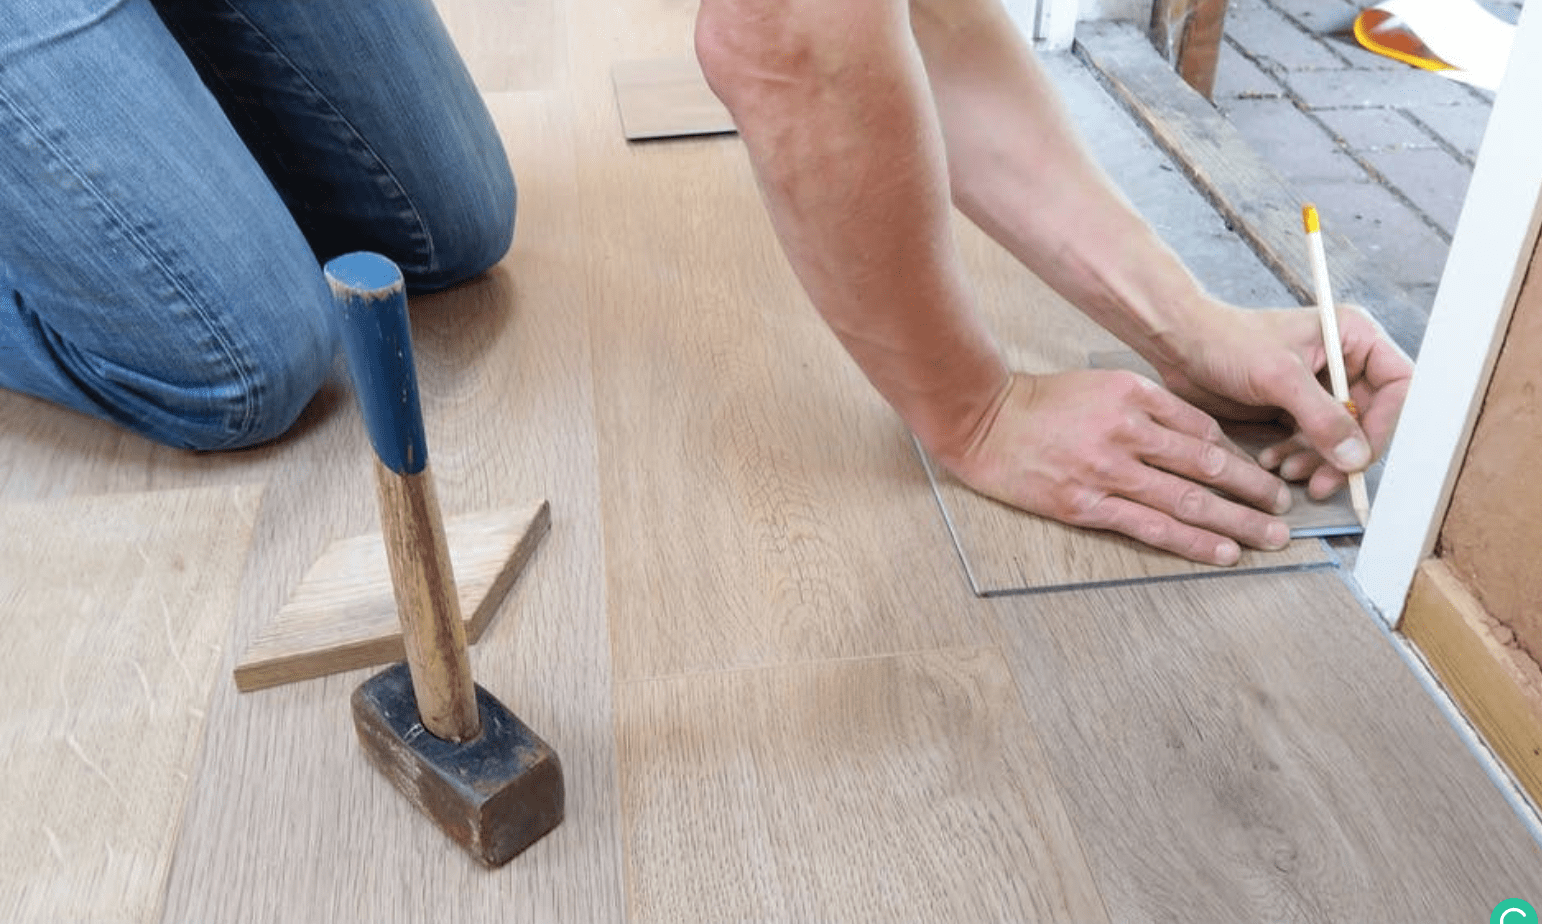 Top cheap ways to finish a basement floor - Measuring tile